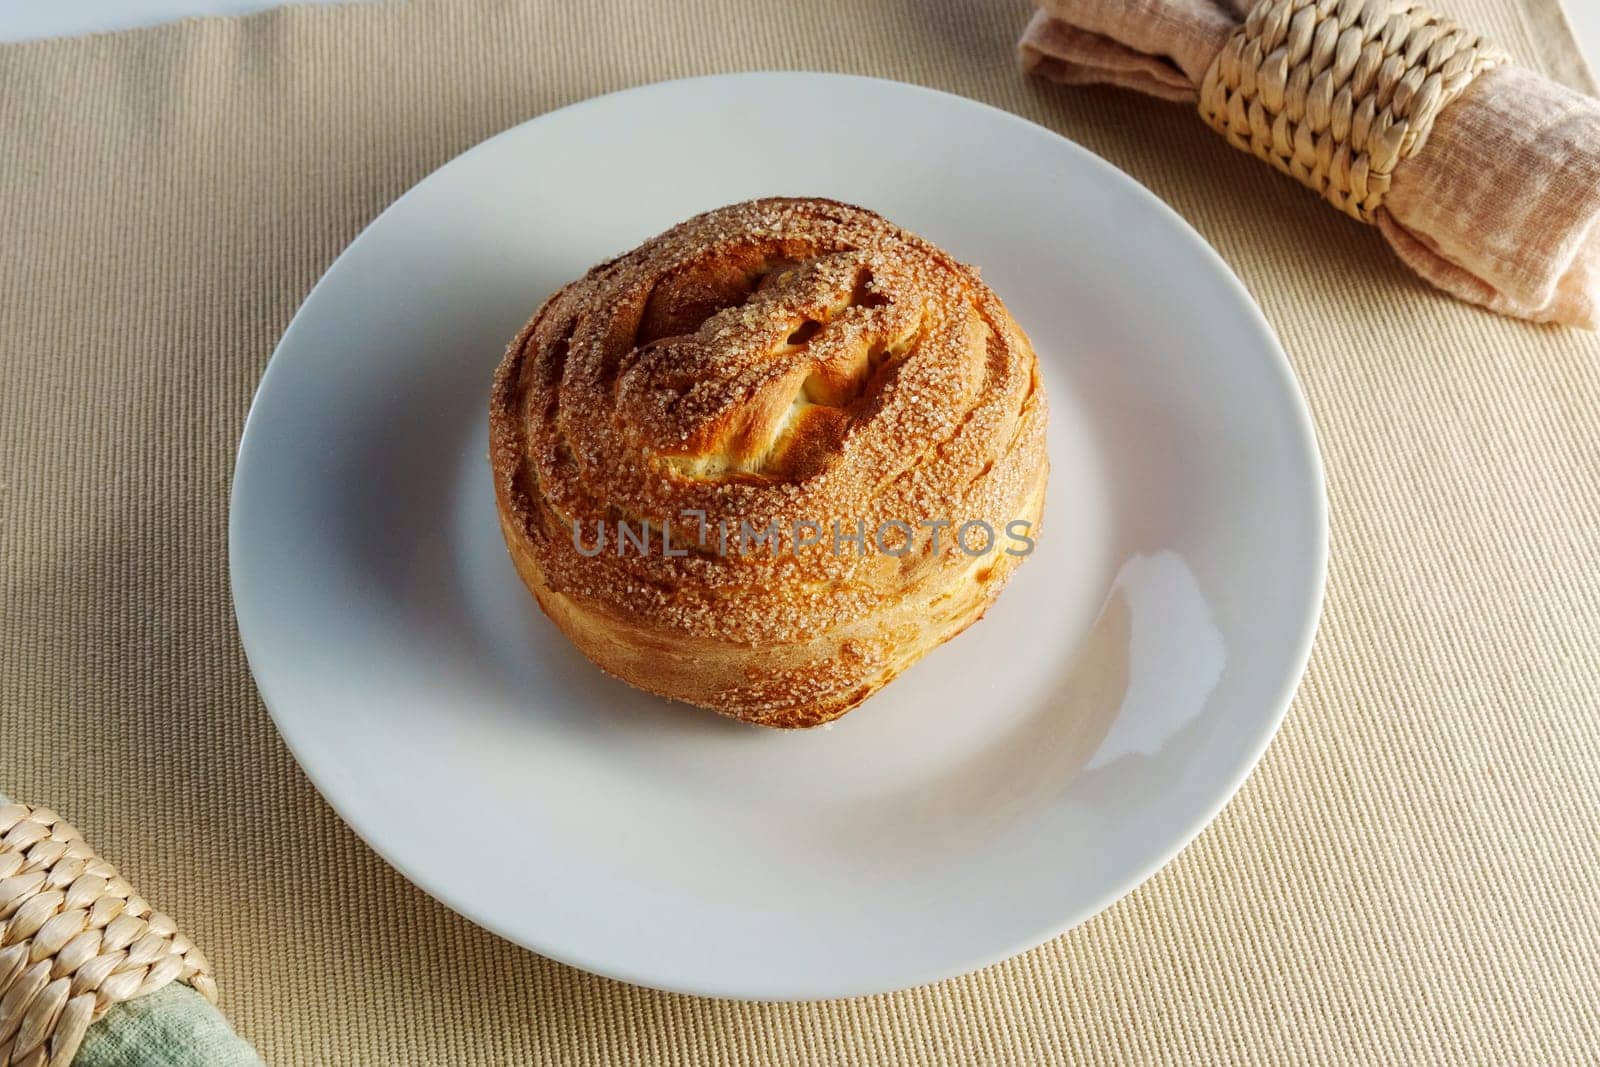 Mouthwatering cinnamon roll takes center stage on a white plate, enticing with its irresistible aroma.